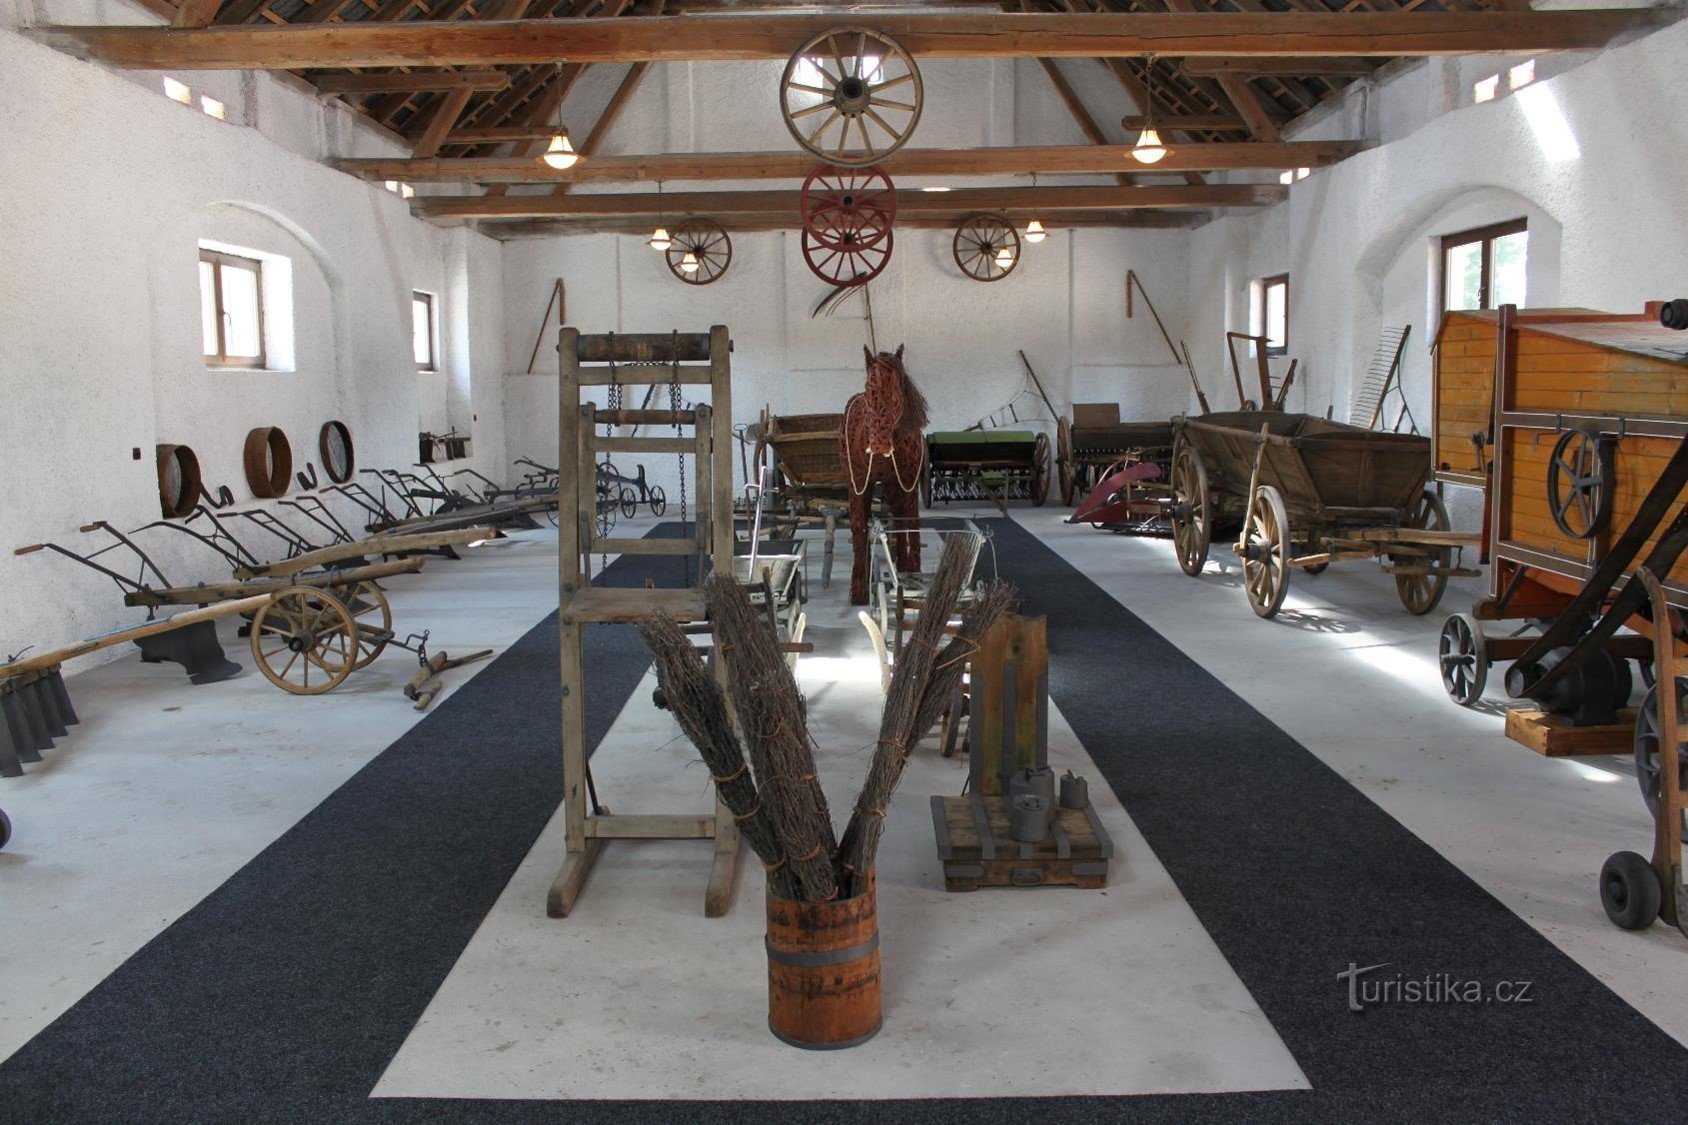 Božetice Museum of Milling, Bakery and Agriculture